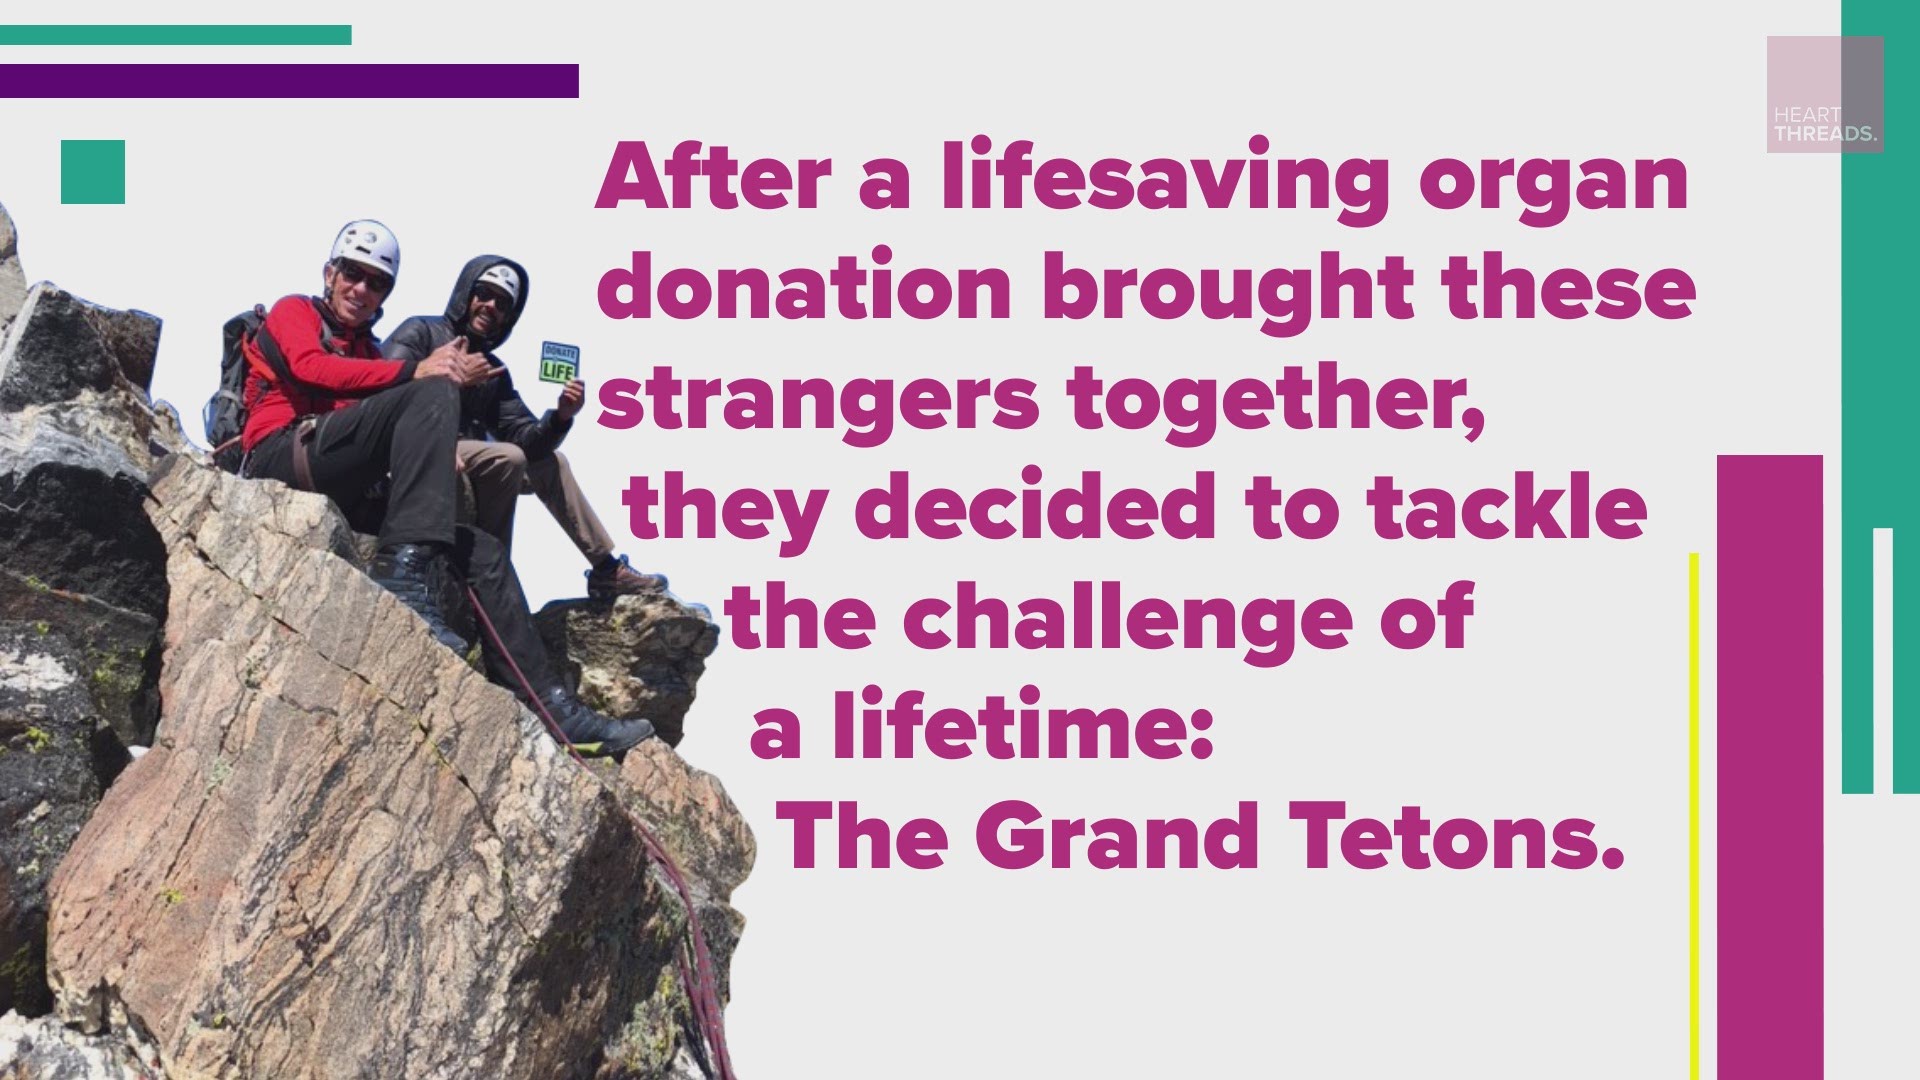 After a lifesaving organ donation brought these strangers together, they decided to tackle the challenge of a lifetime in their own backyard: The Grand Tetons.